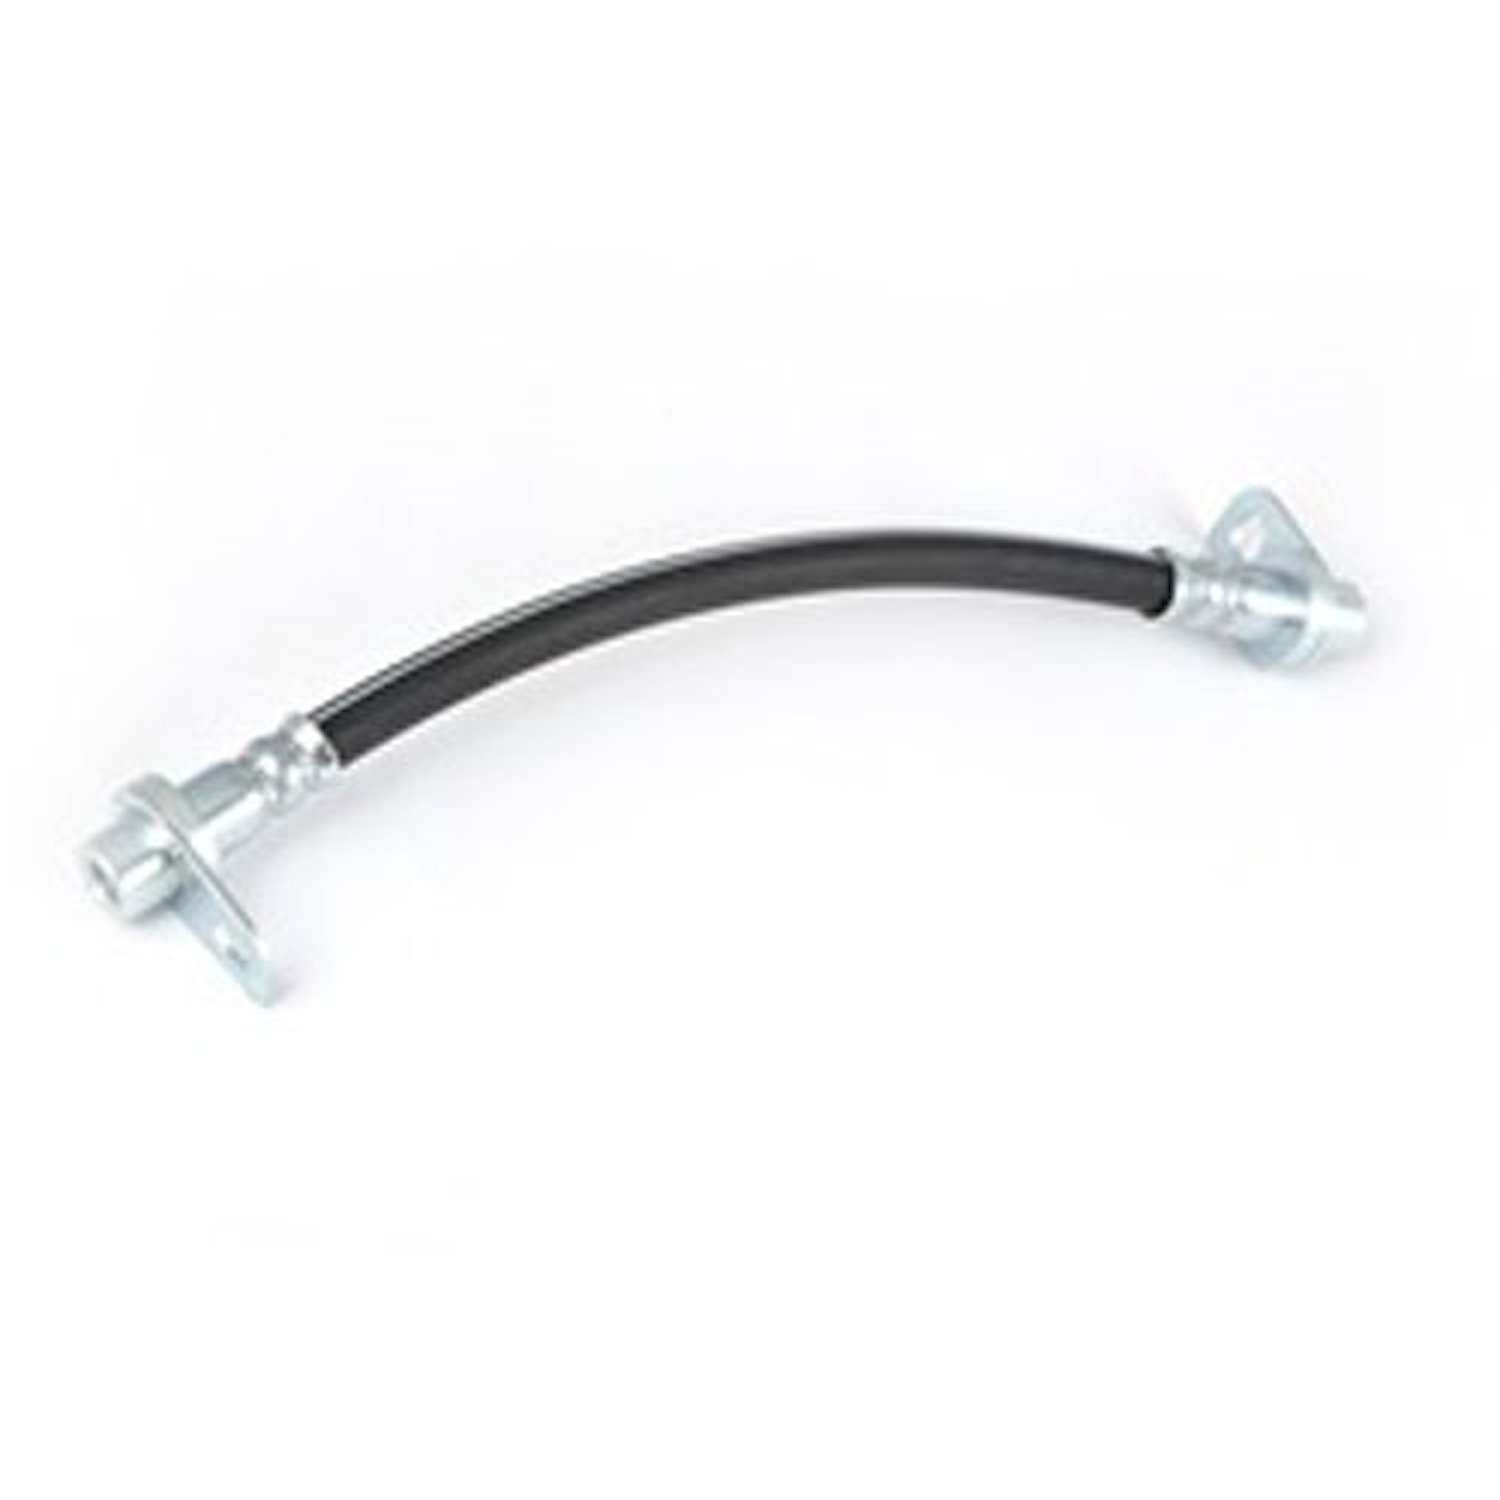 This left rear brake hose from Omix-ADA fits